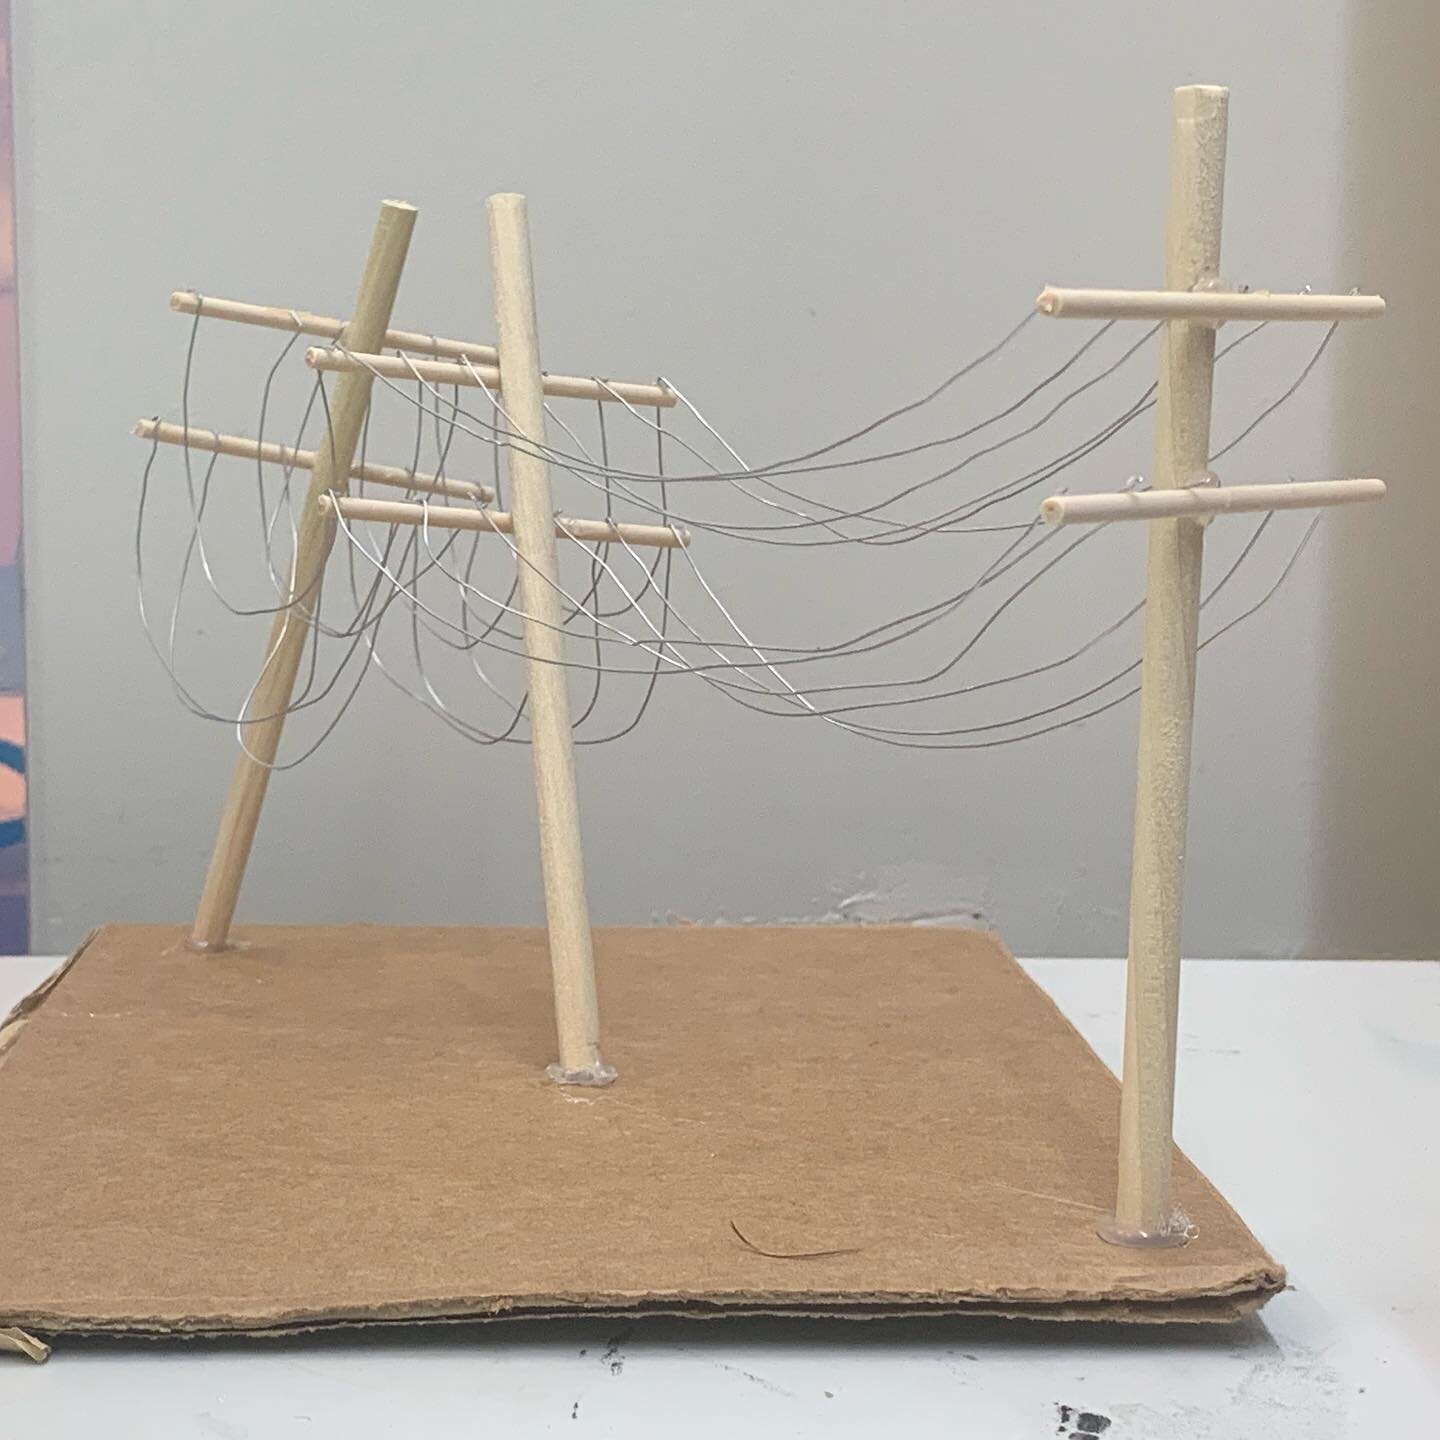 A little studio sketch from this week. I&rsquo;m working through some ideas to combine my ongoing interest in power infrastructure with past visual elements like lines that drape or stretch taut. 
#sculptureprocess #powerlines #maquette #wip